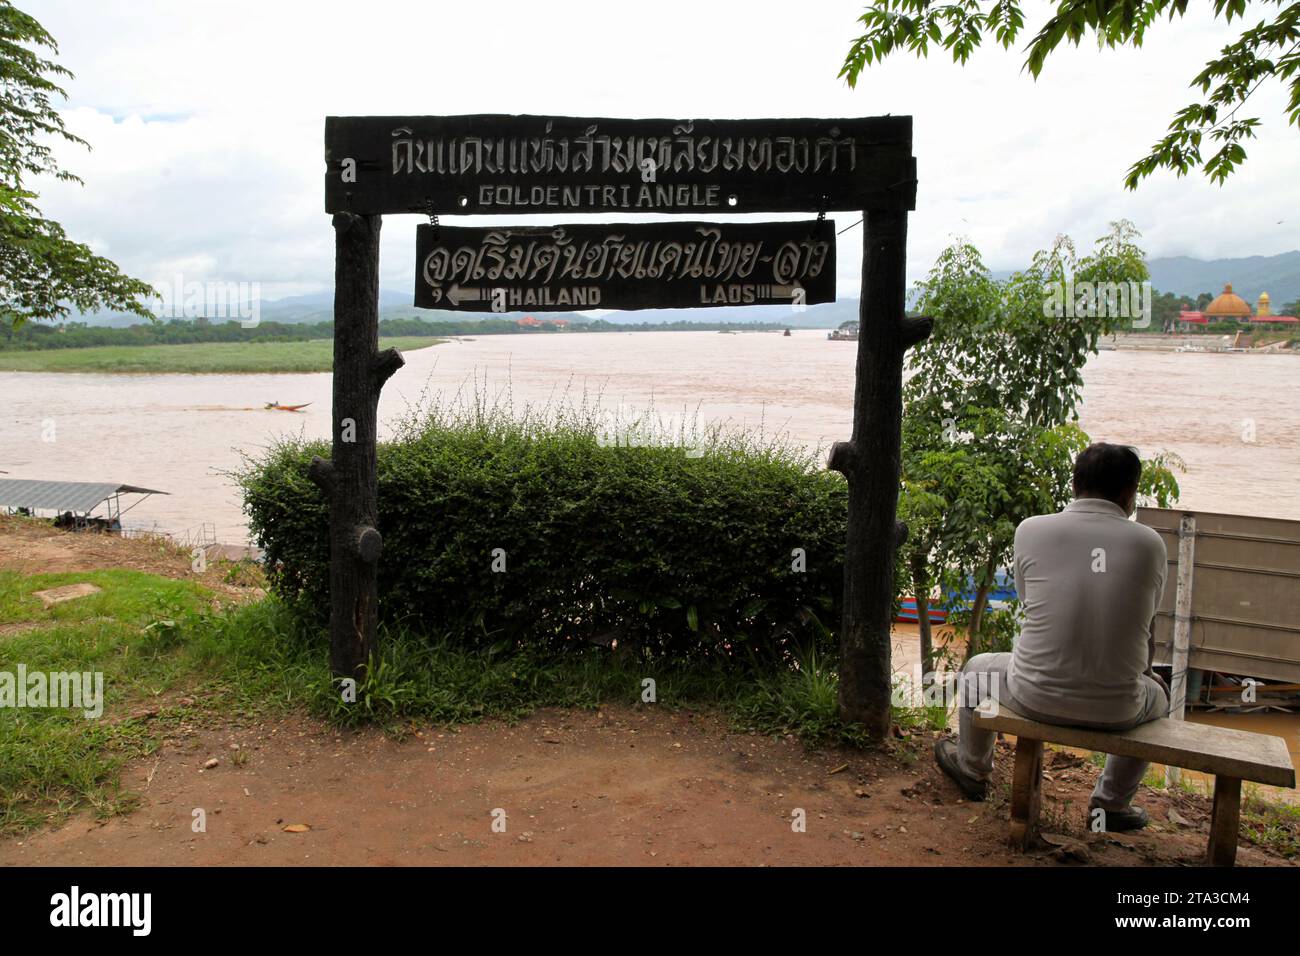 Chiang Saen, Thailand - August 04 2012: Old Thai sat next to a sign at the Golden Triangle indicating the directions of the Thai and Laos borders. On Stock Photo